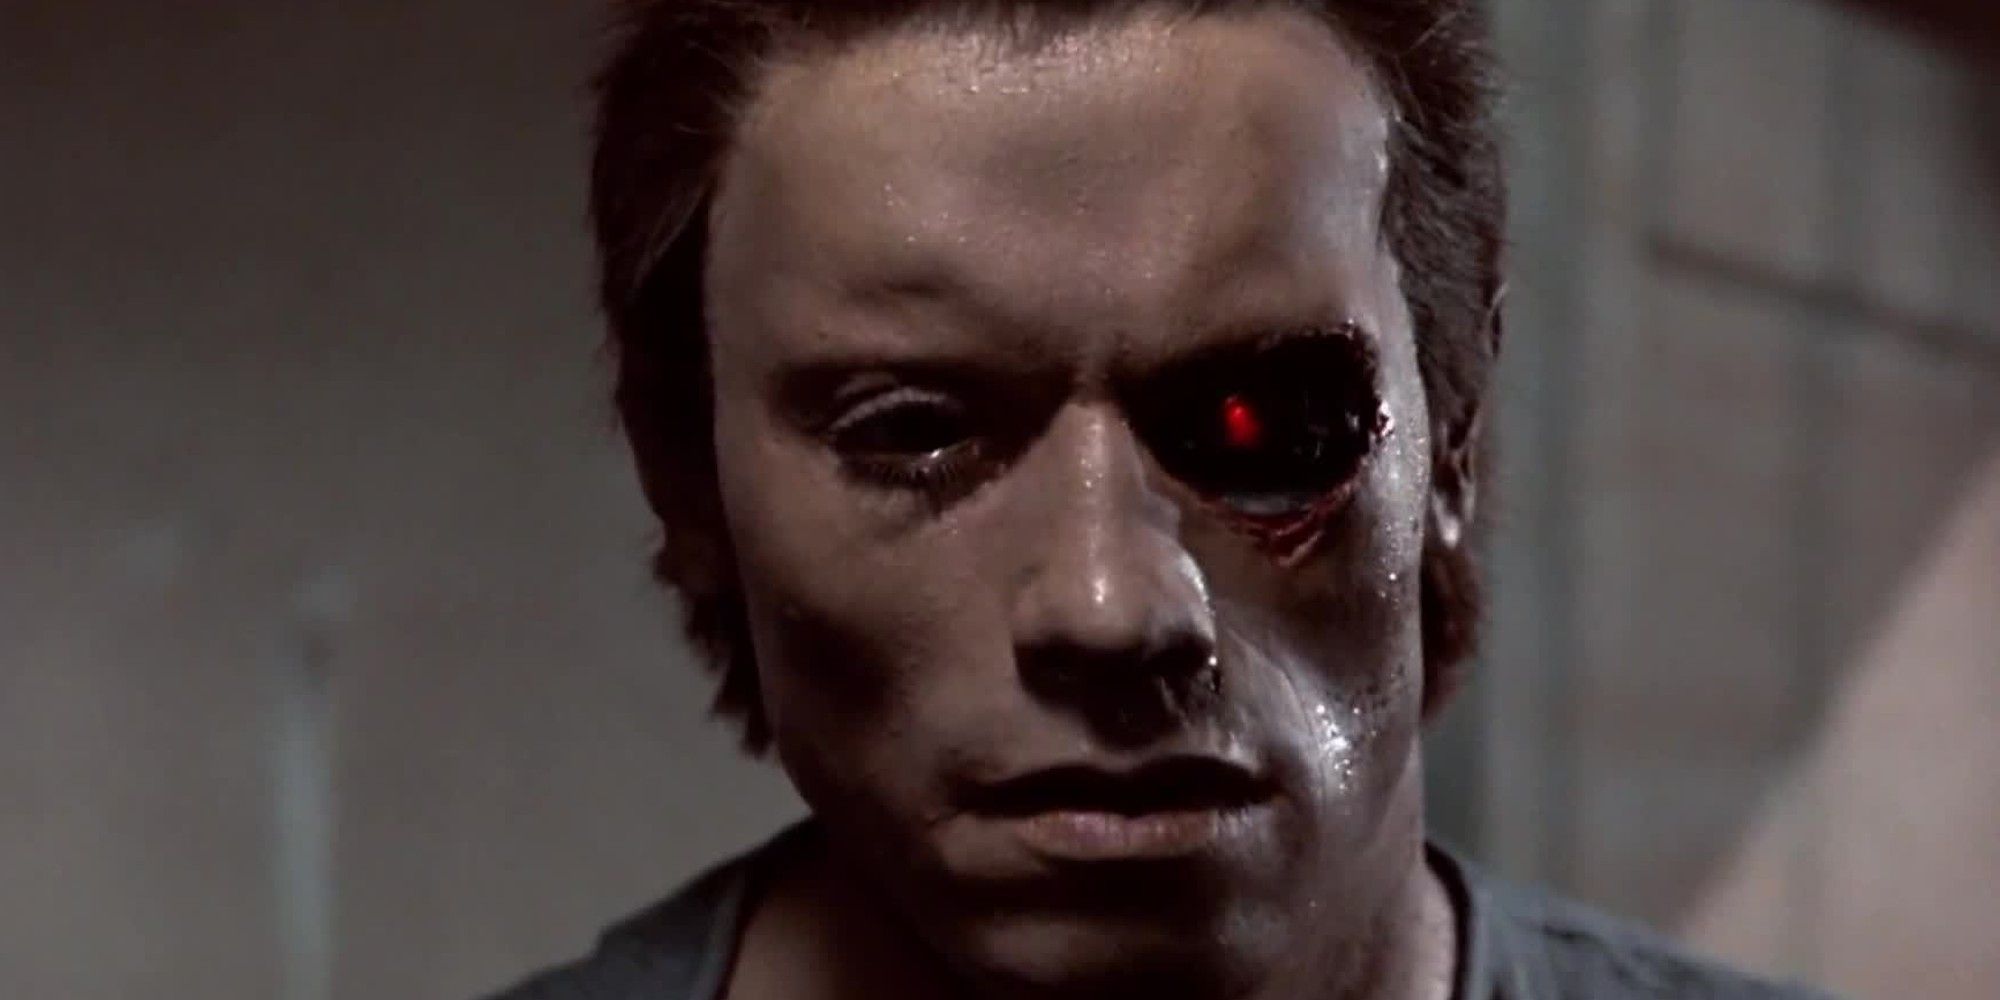 The T-800 messing with his face in The Terminator